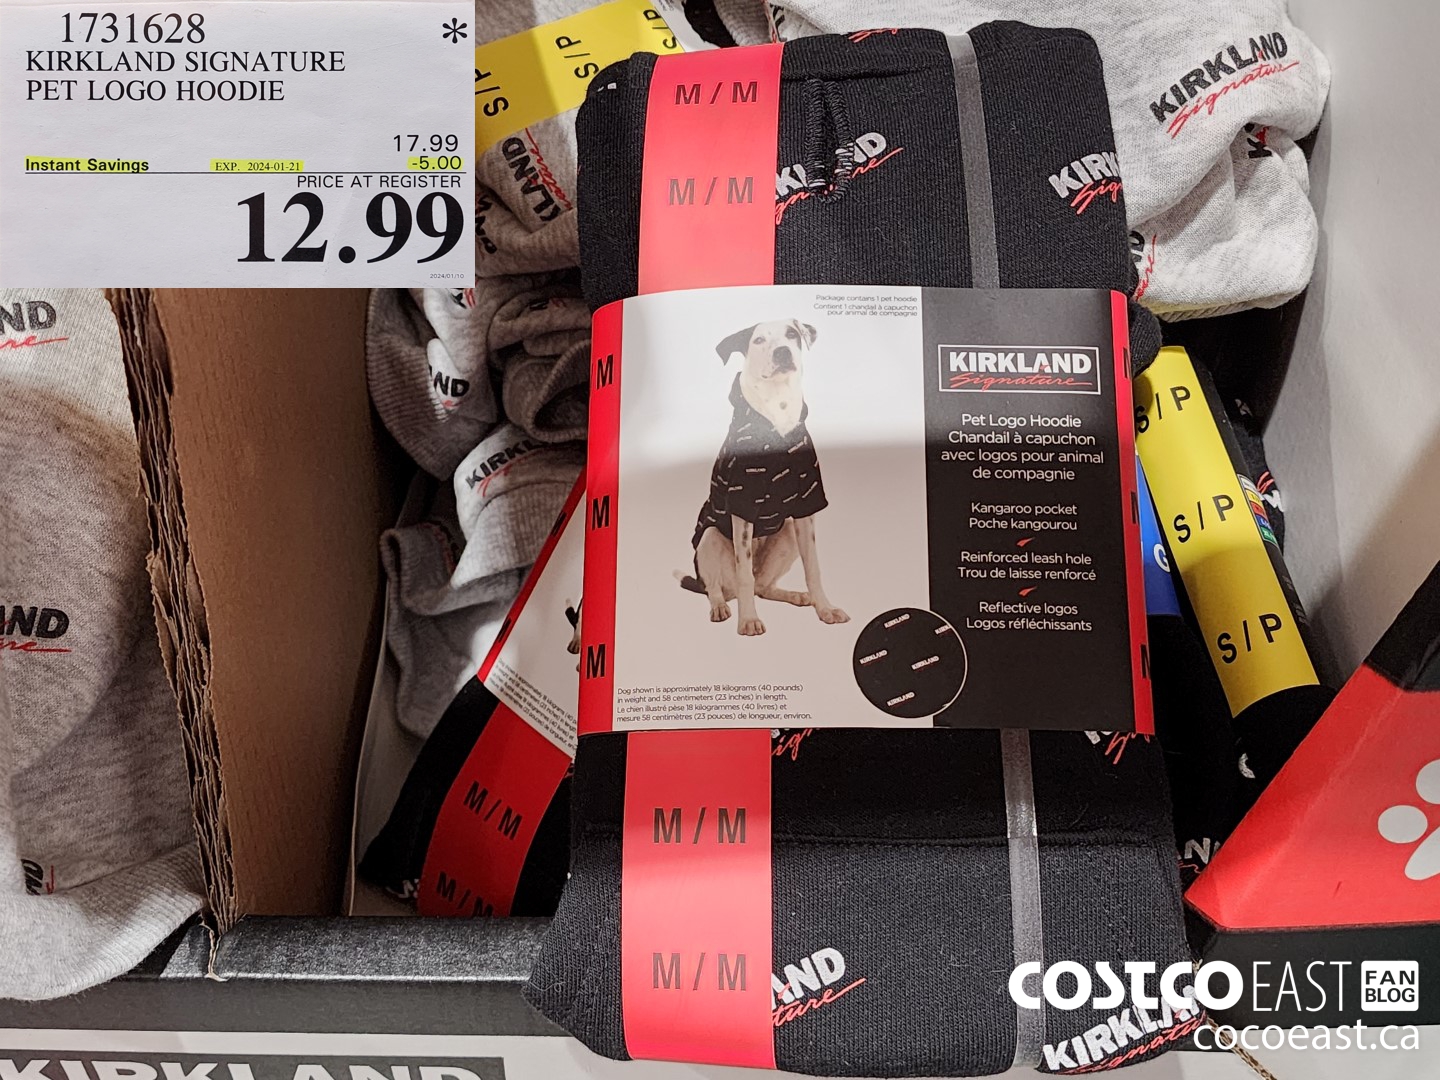 Costco Winter 2023 Clothing Superpost – Swimsuits & Spring